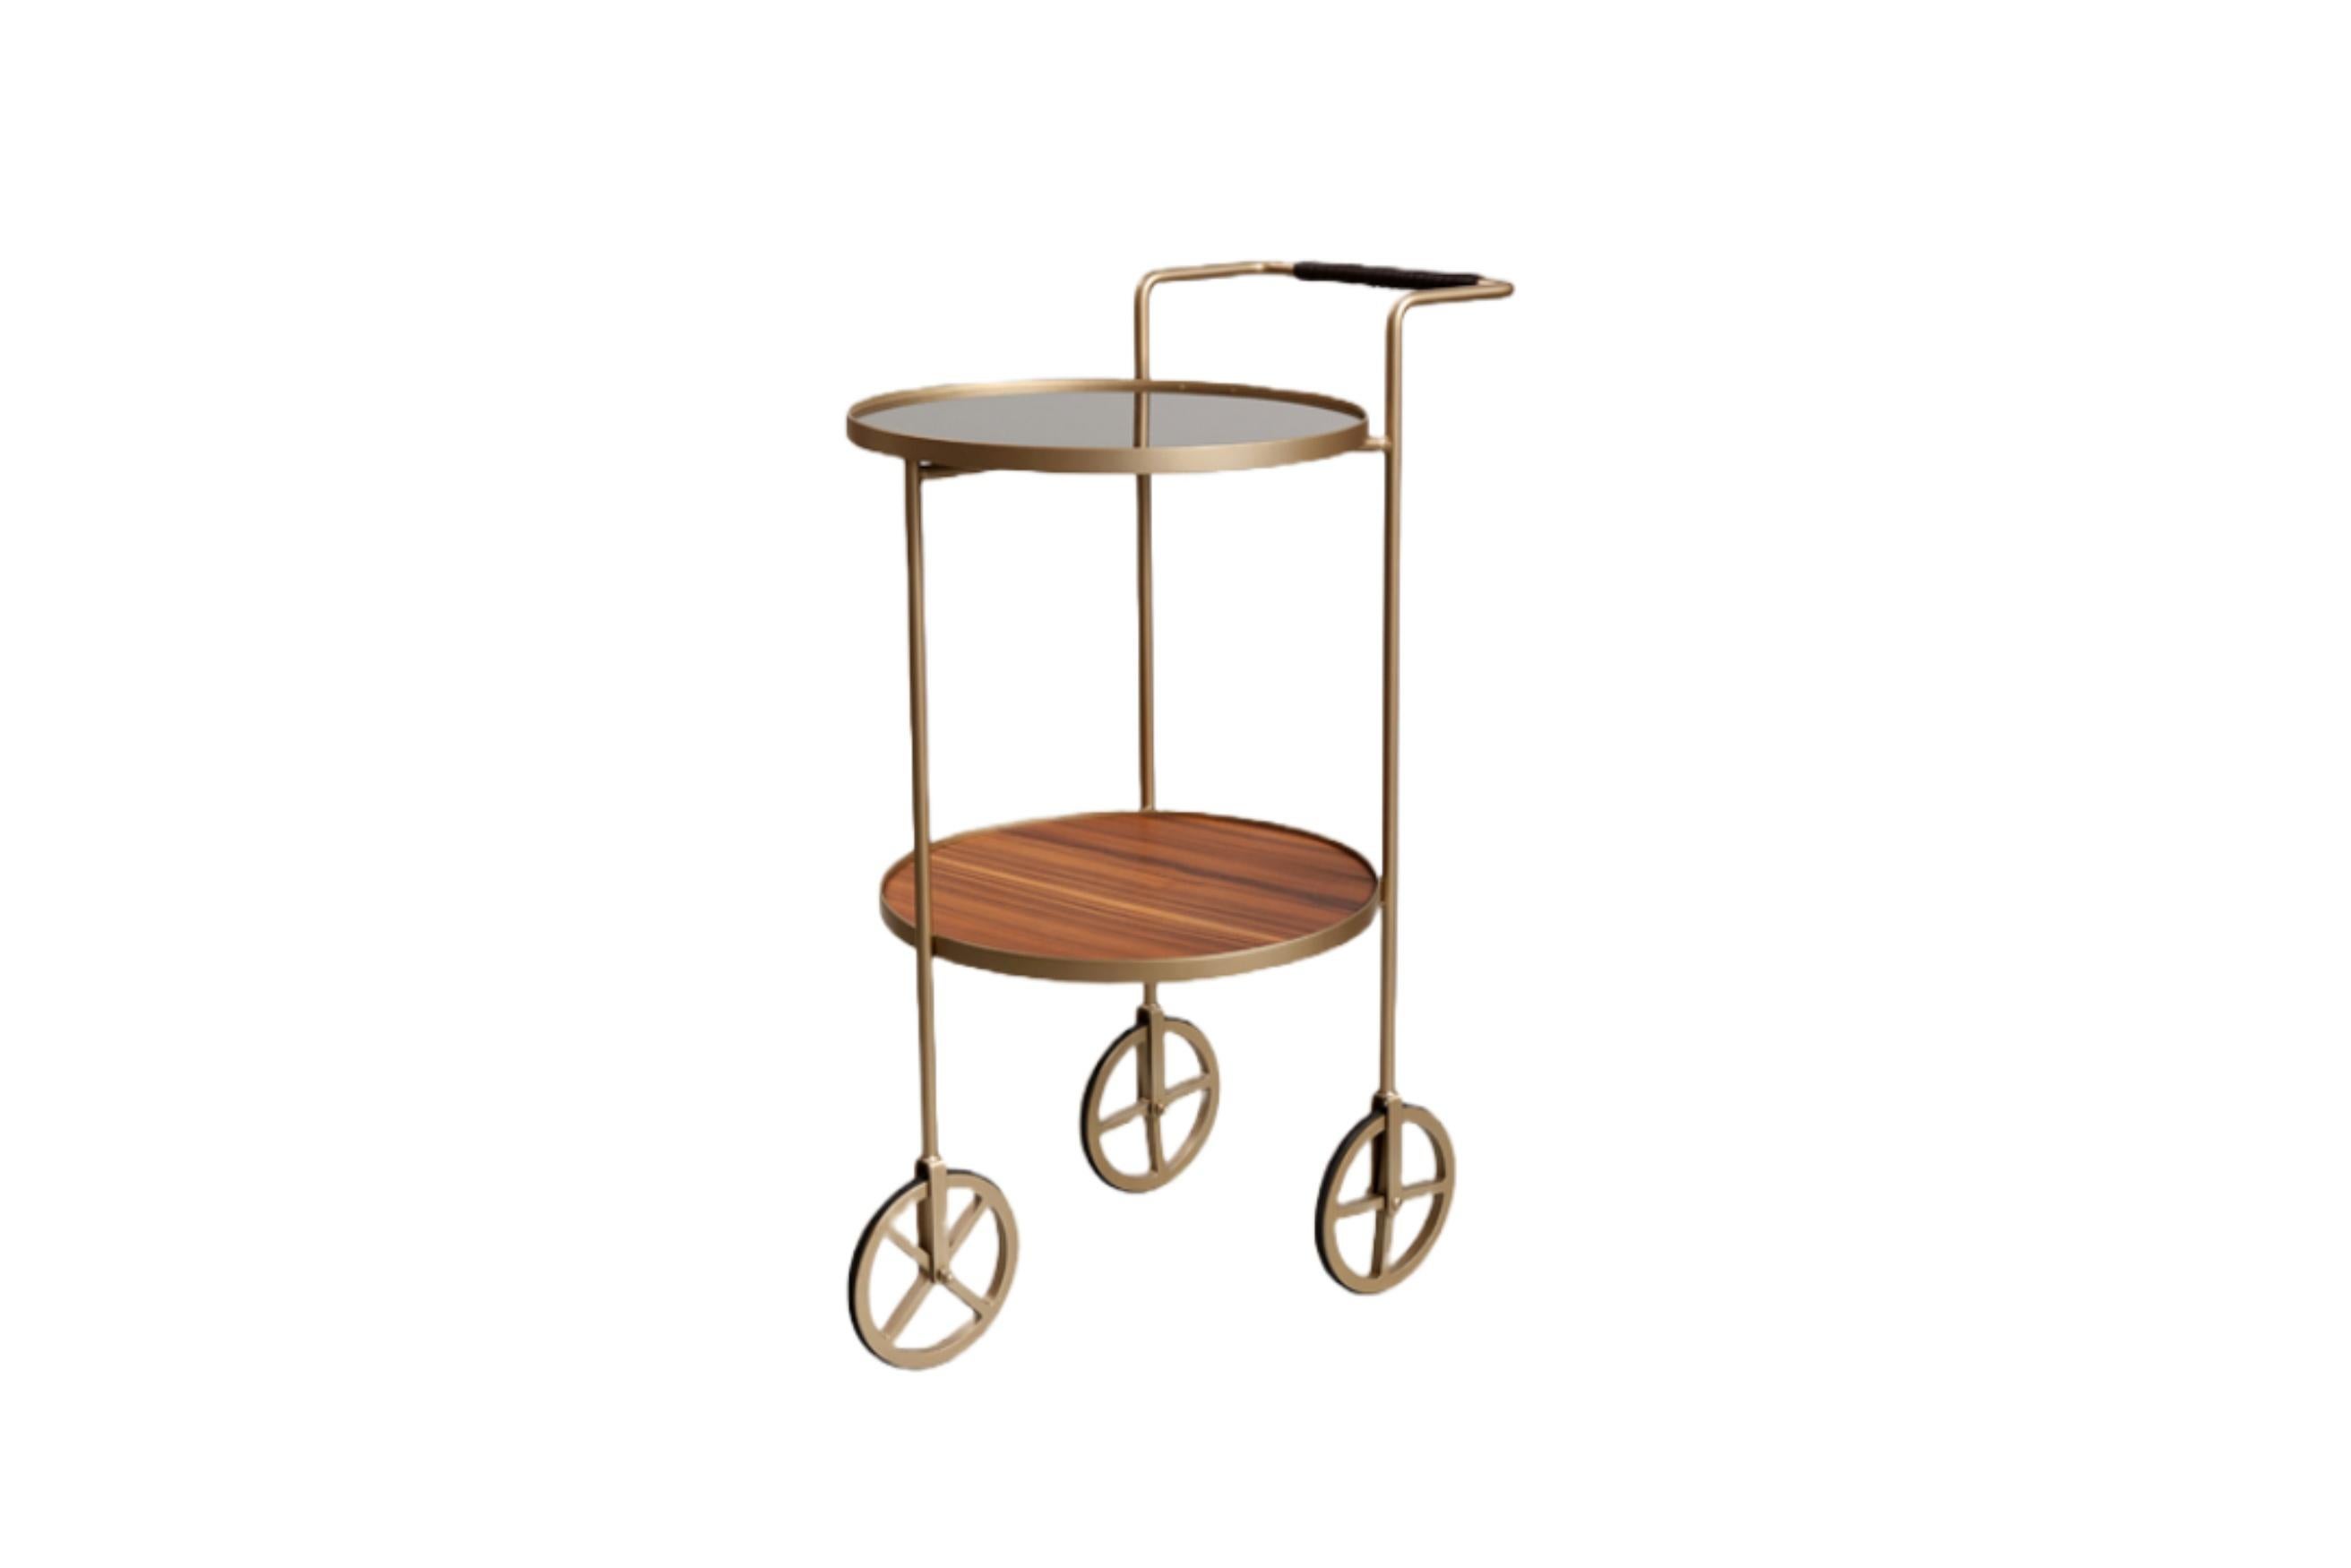 True to her enthusiasm for the Modernist Movement Alessandra Delgado was inspired by Jorge Zalszupin timeless architectonic view to create the bar cart 